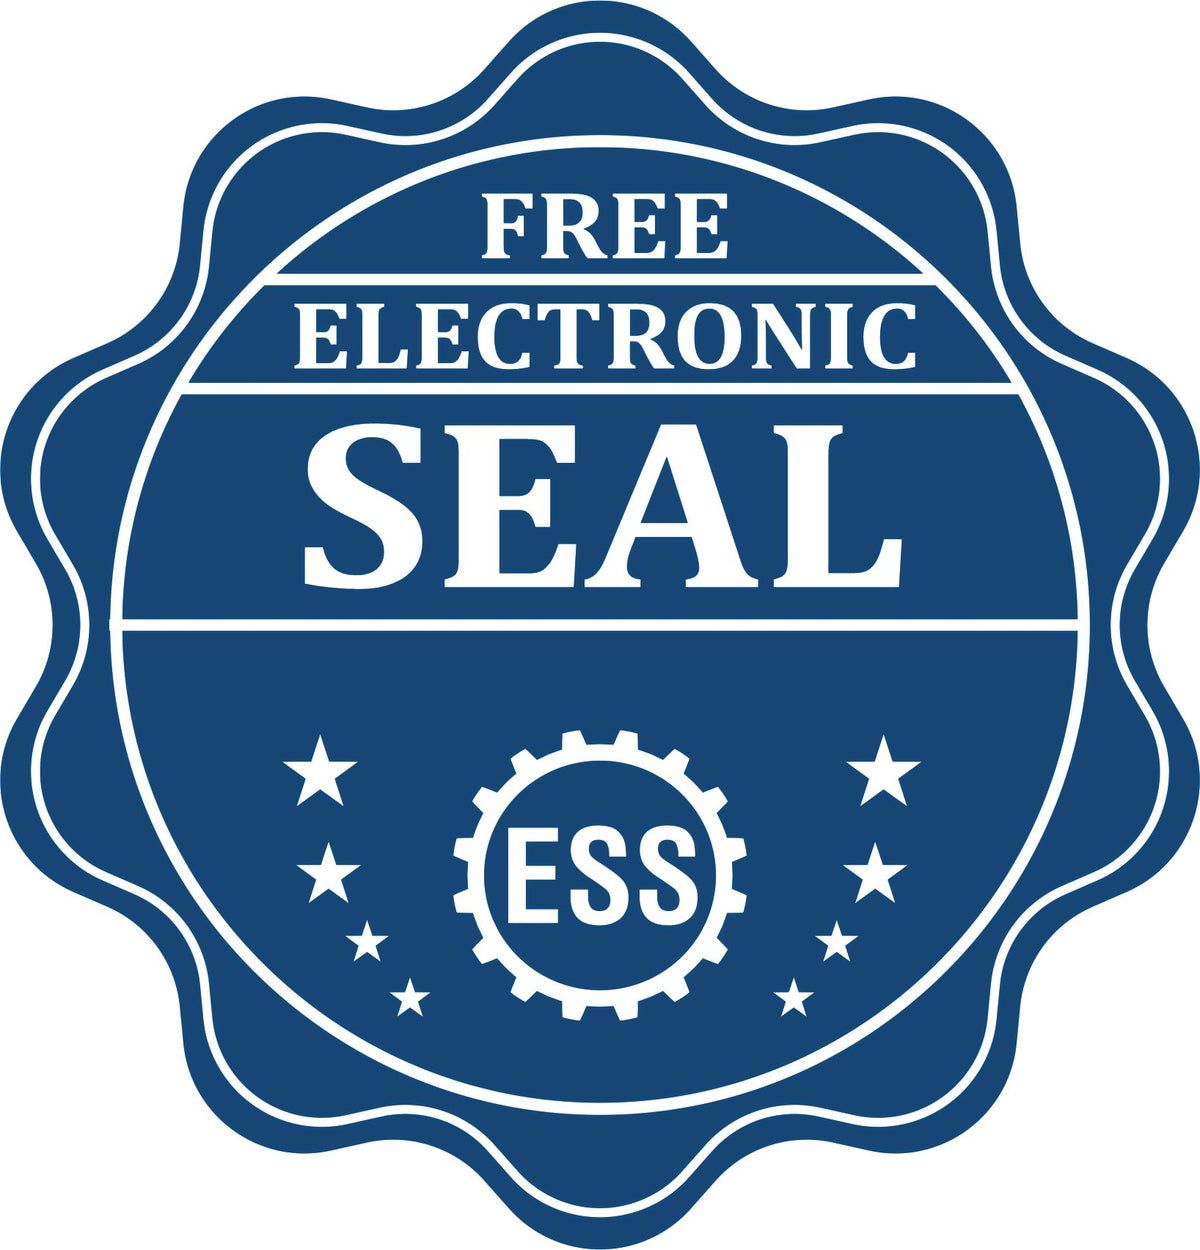 A badge showing a free electronic seal for the Gift Maryland Engineer Seal with stars and the ESS gear on the emblem.